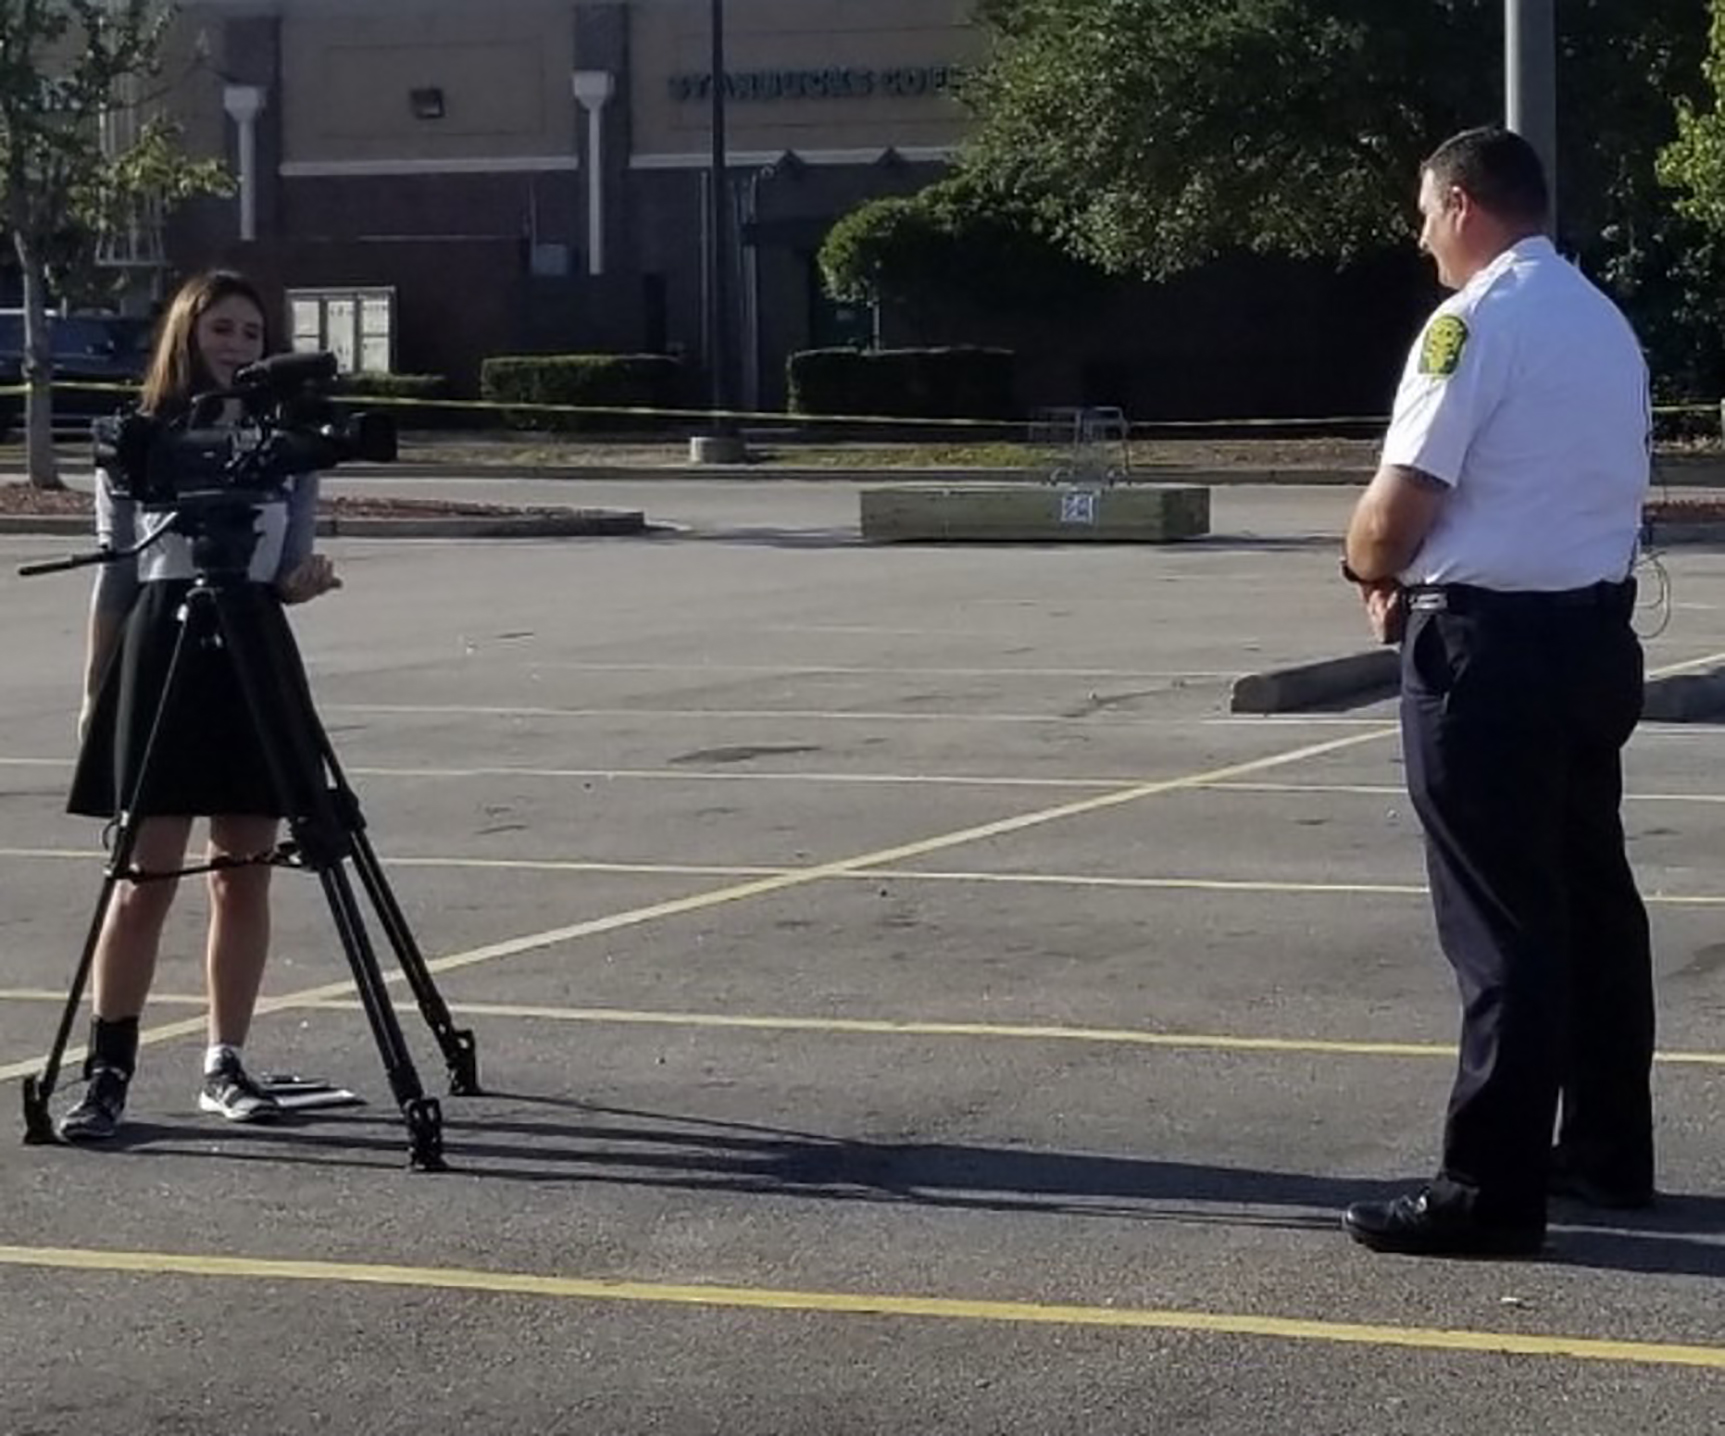 Capt. Jeremiah Lee, public information officer for Summerville Fire and Rescue, speaks on camera.